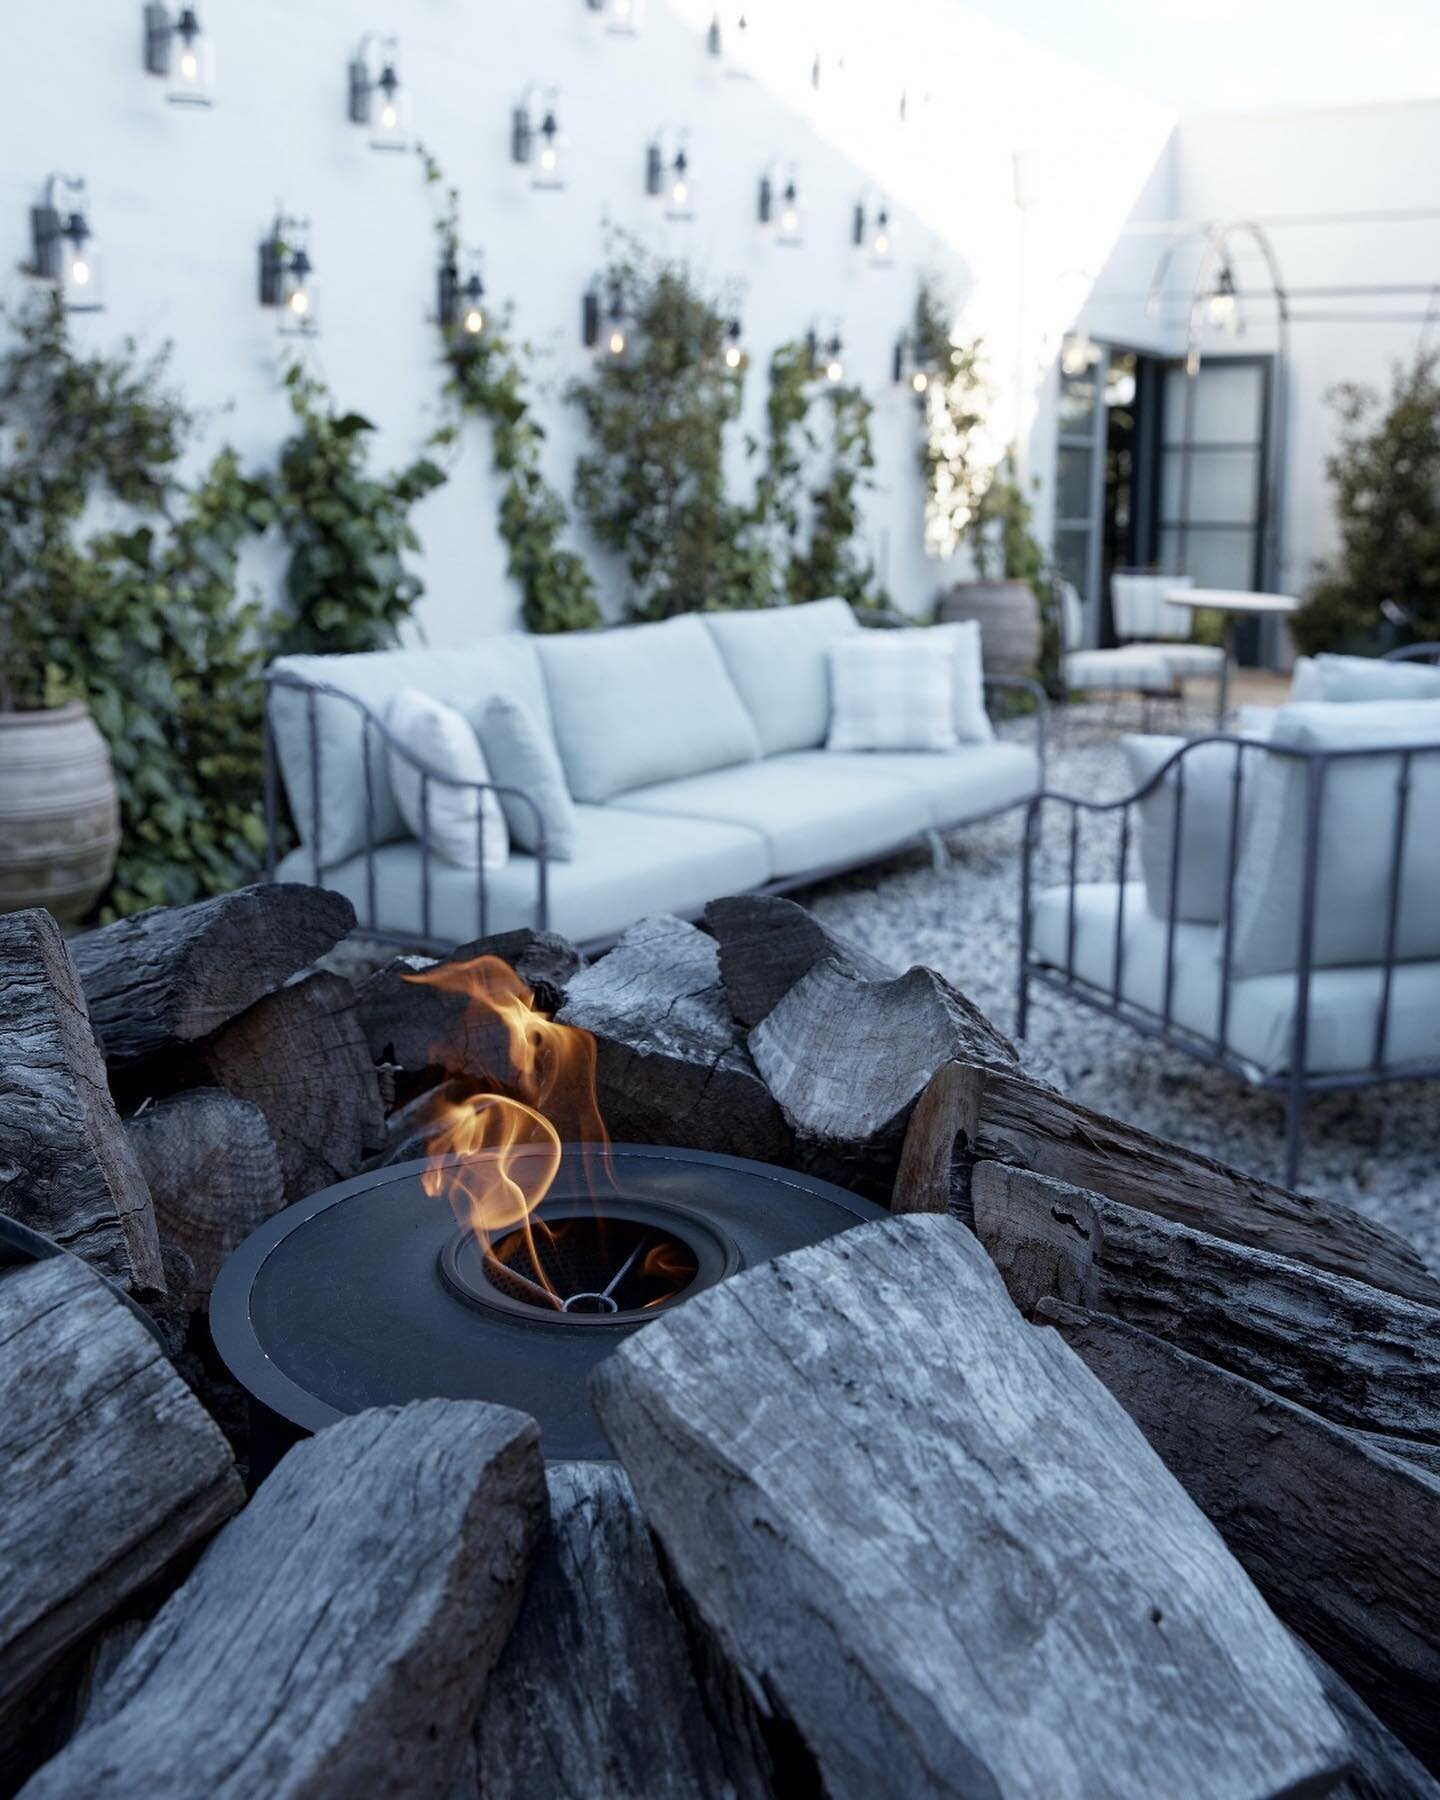 Warm up your winter with a cozy stay in the Southern Highlands 🔥

Spend an evening by the fire, sip on a glass of red, or take a soak in the bathtub at this luxury boutique hotel.

To book, head to our link in bio. 

Credit: Alan Jensen Photography 